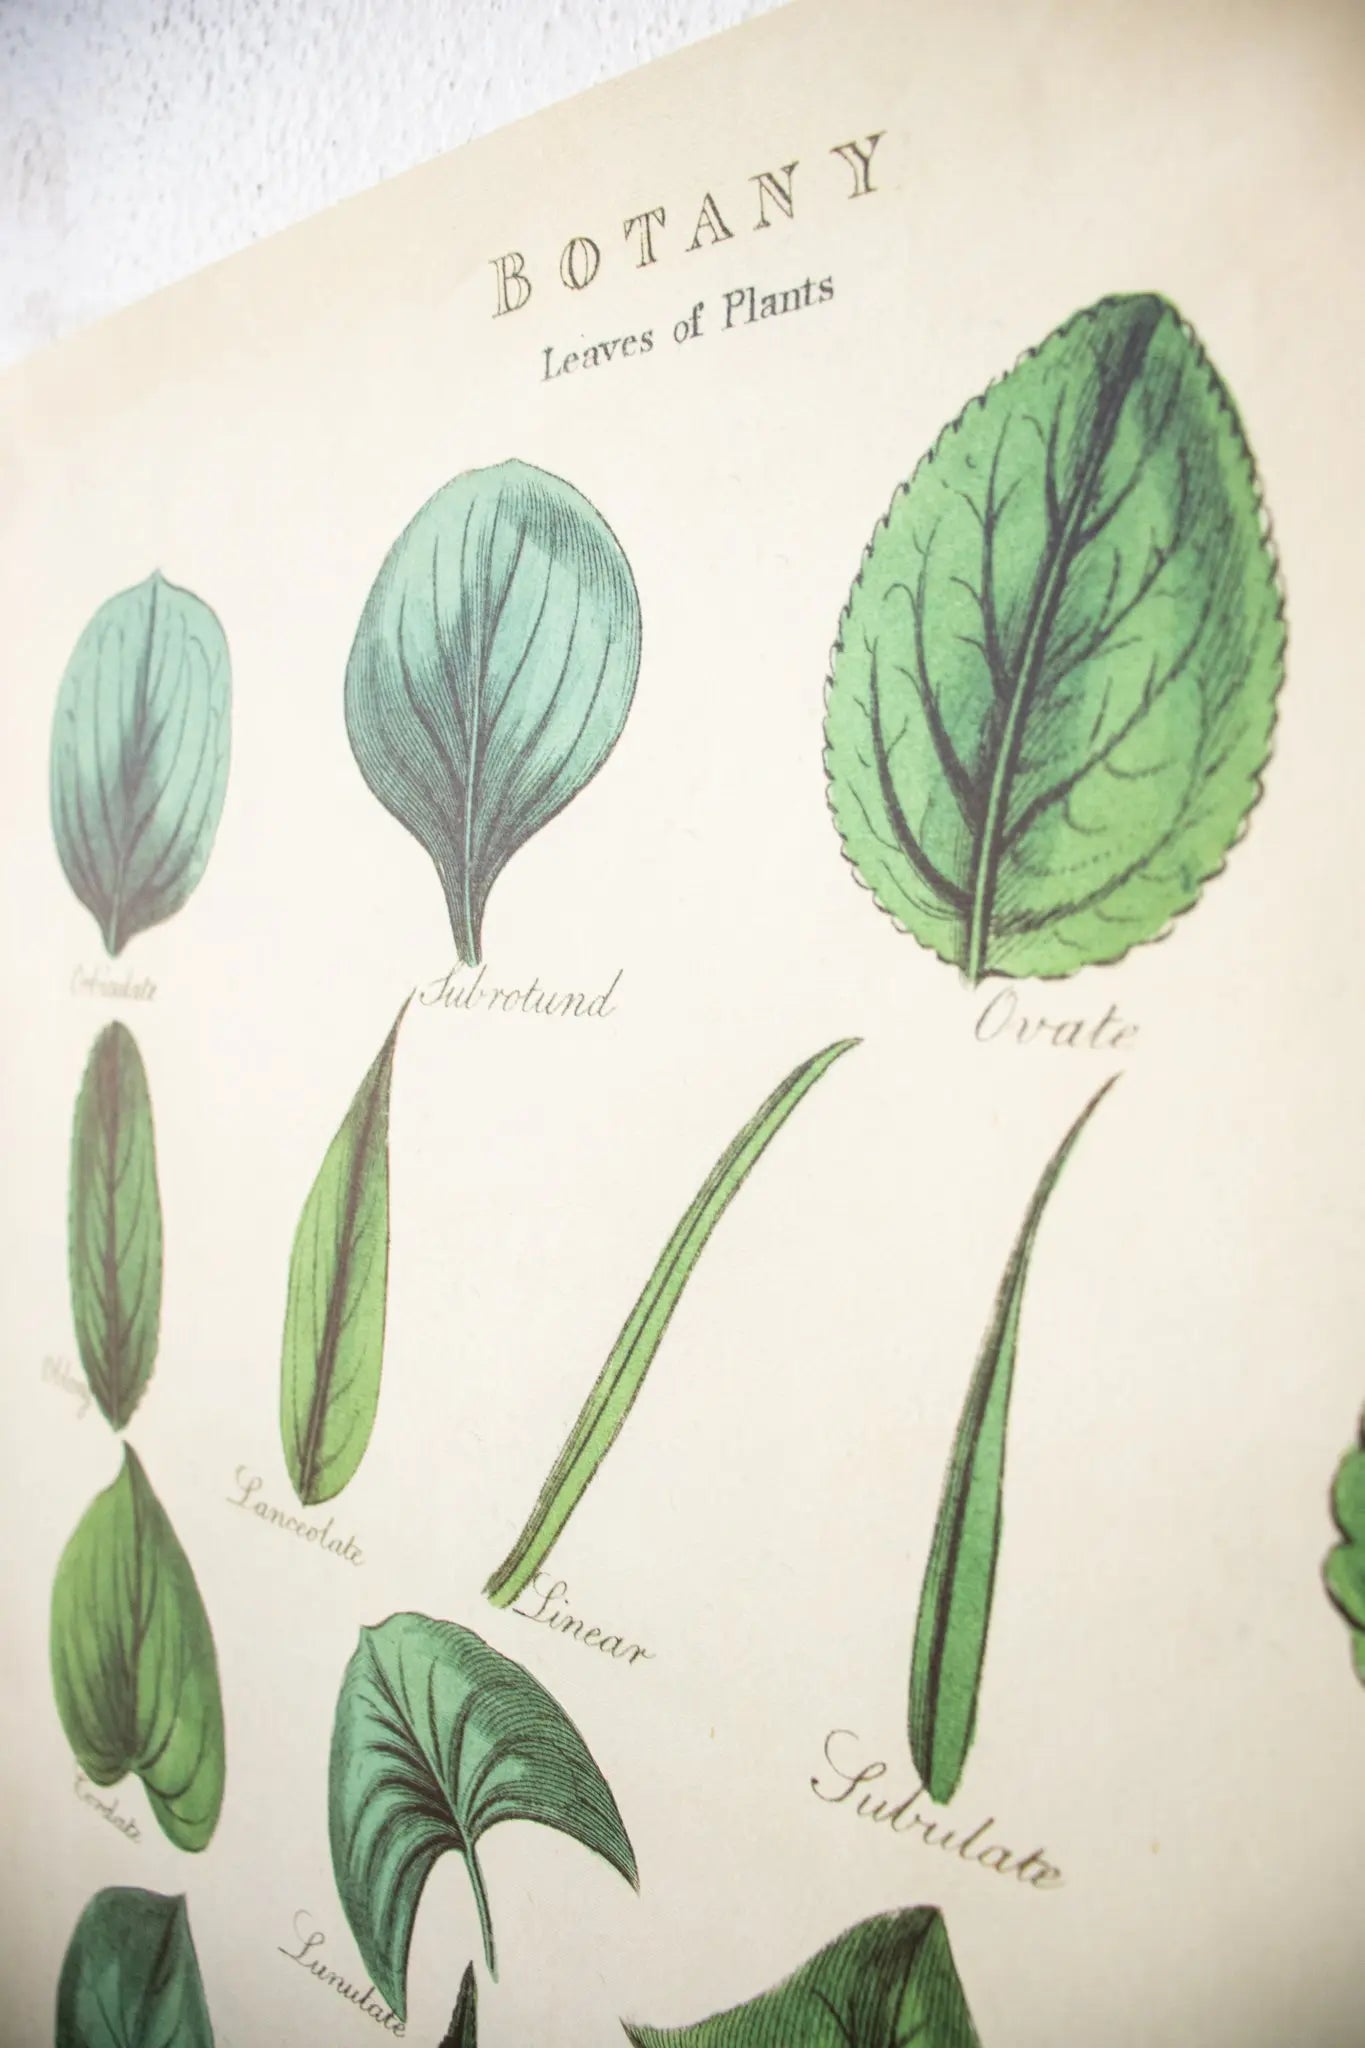 Botany: Leaves of Plants Scientific Chart - Stemcell Science Shop